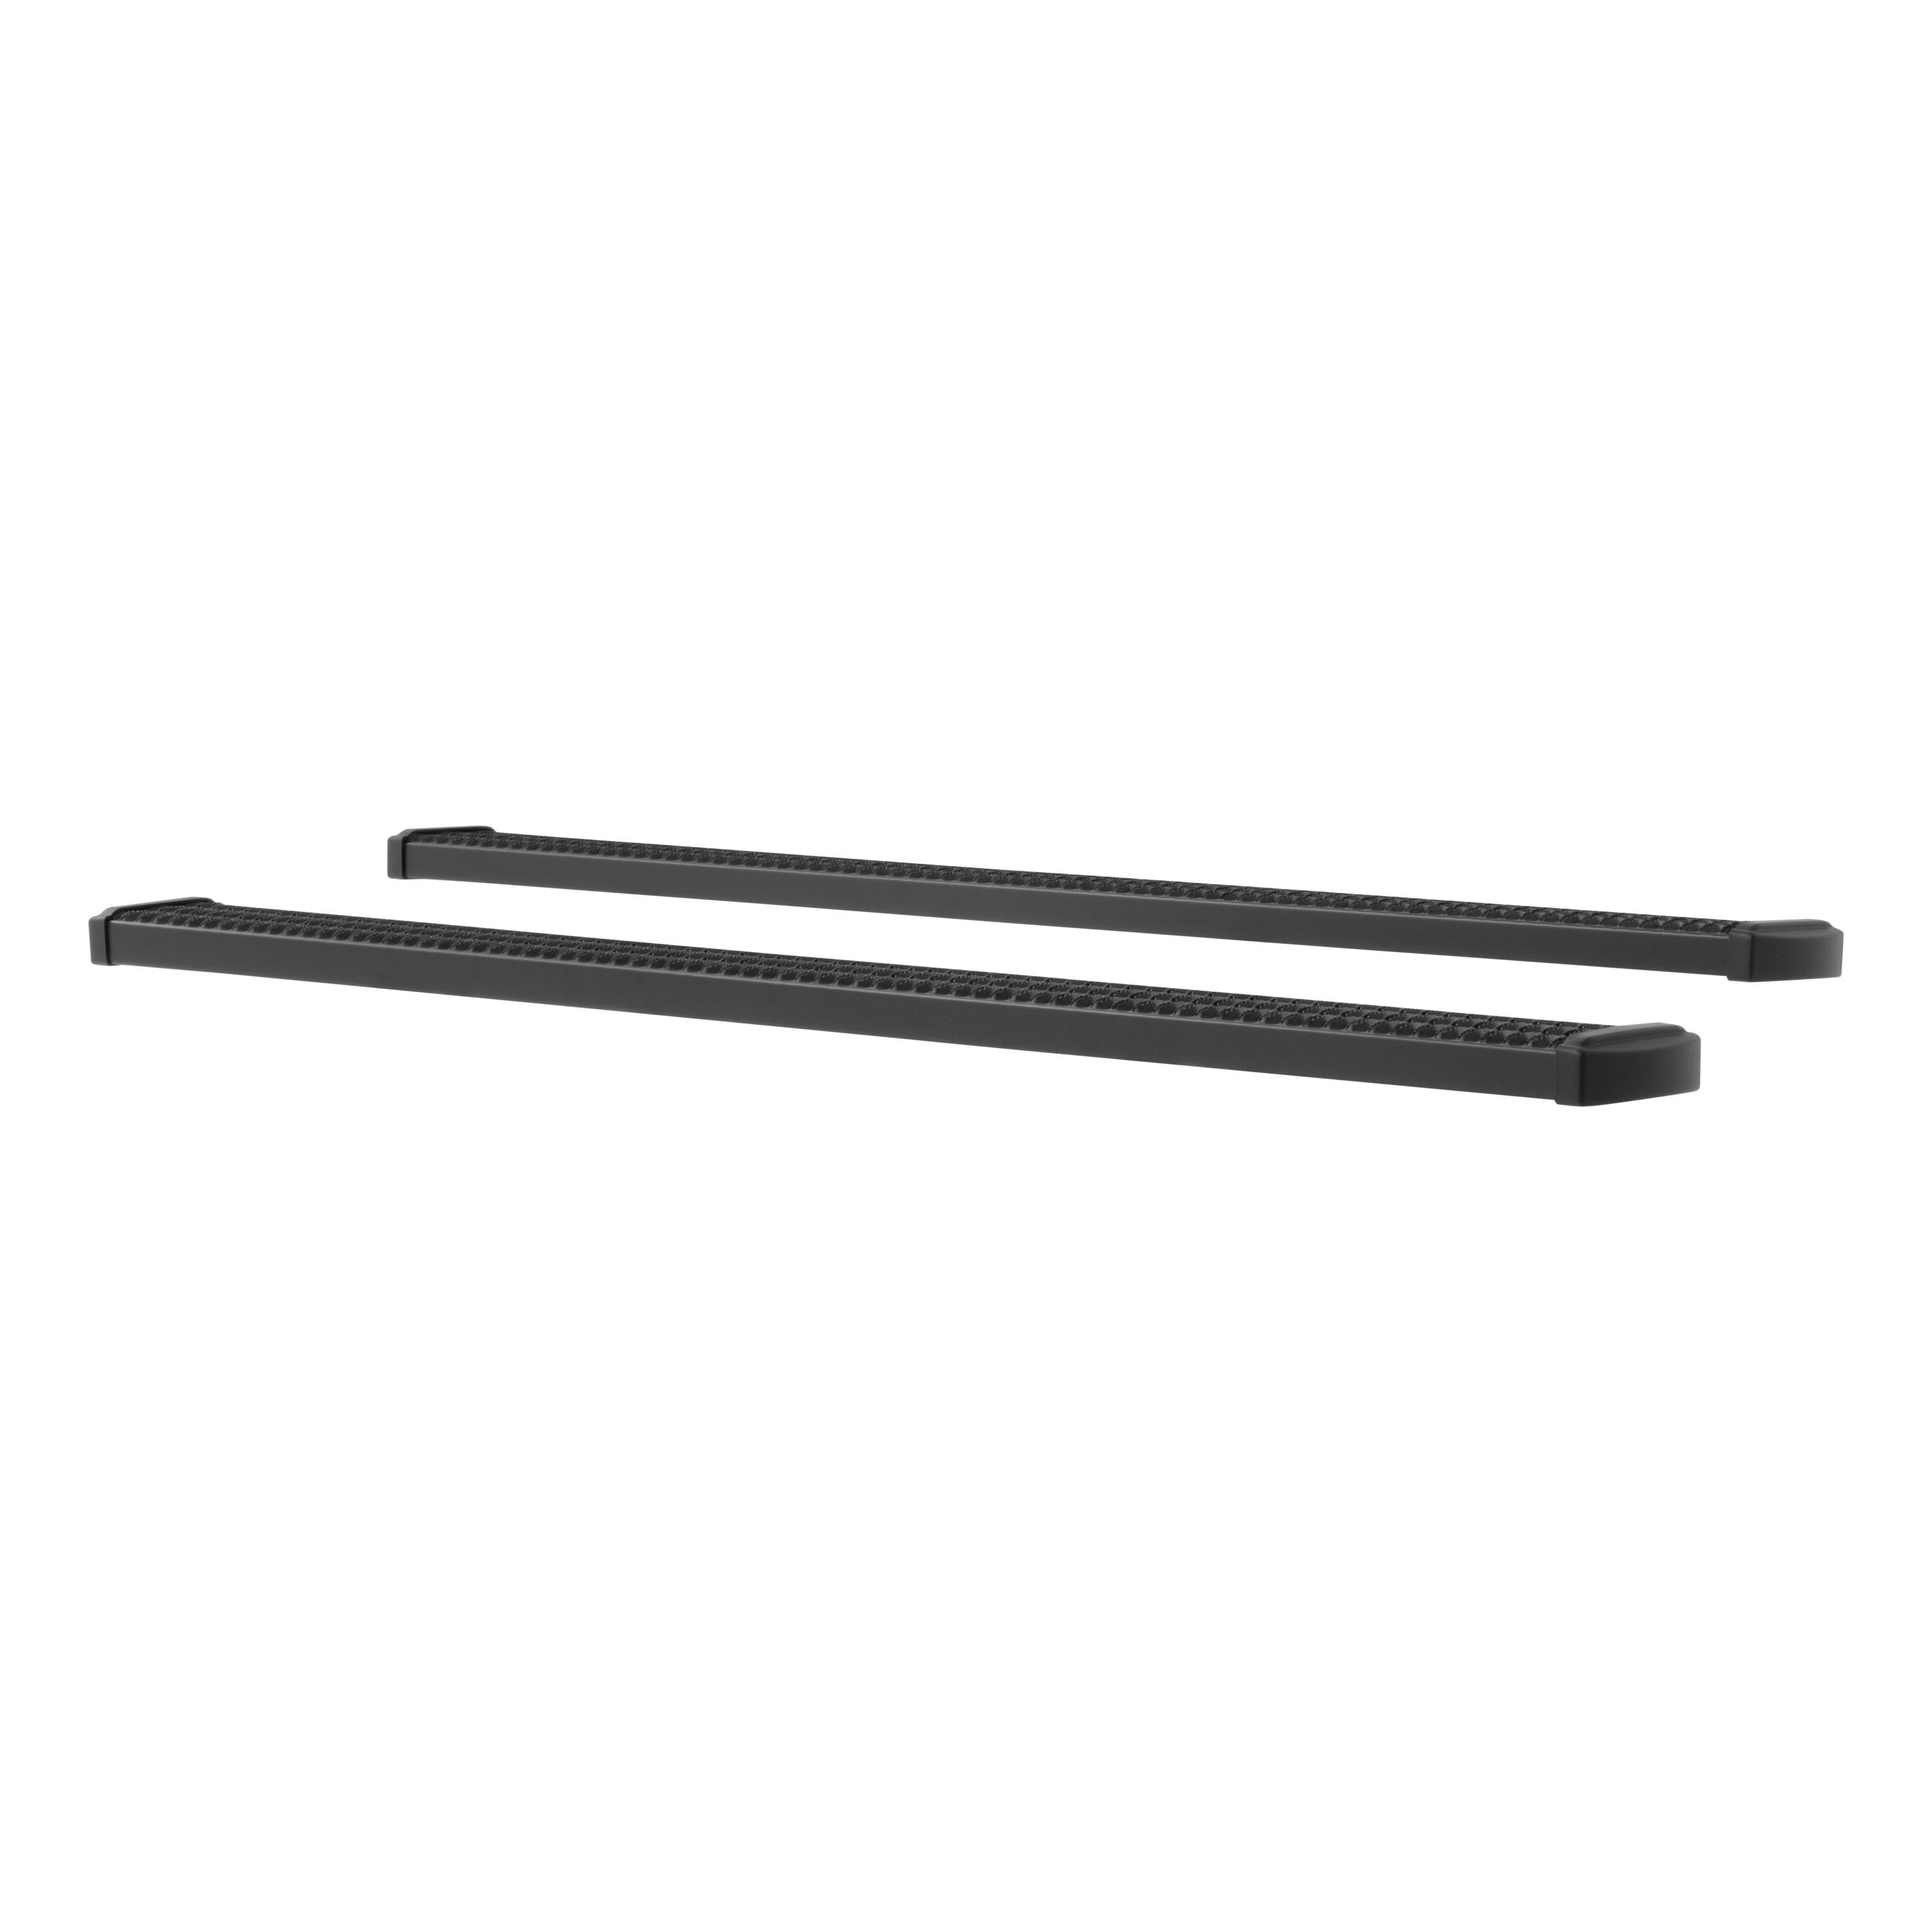 LUVERNE 415088-400752 Grip Step 7 inch Running Boards